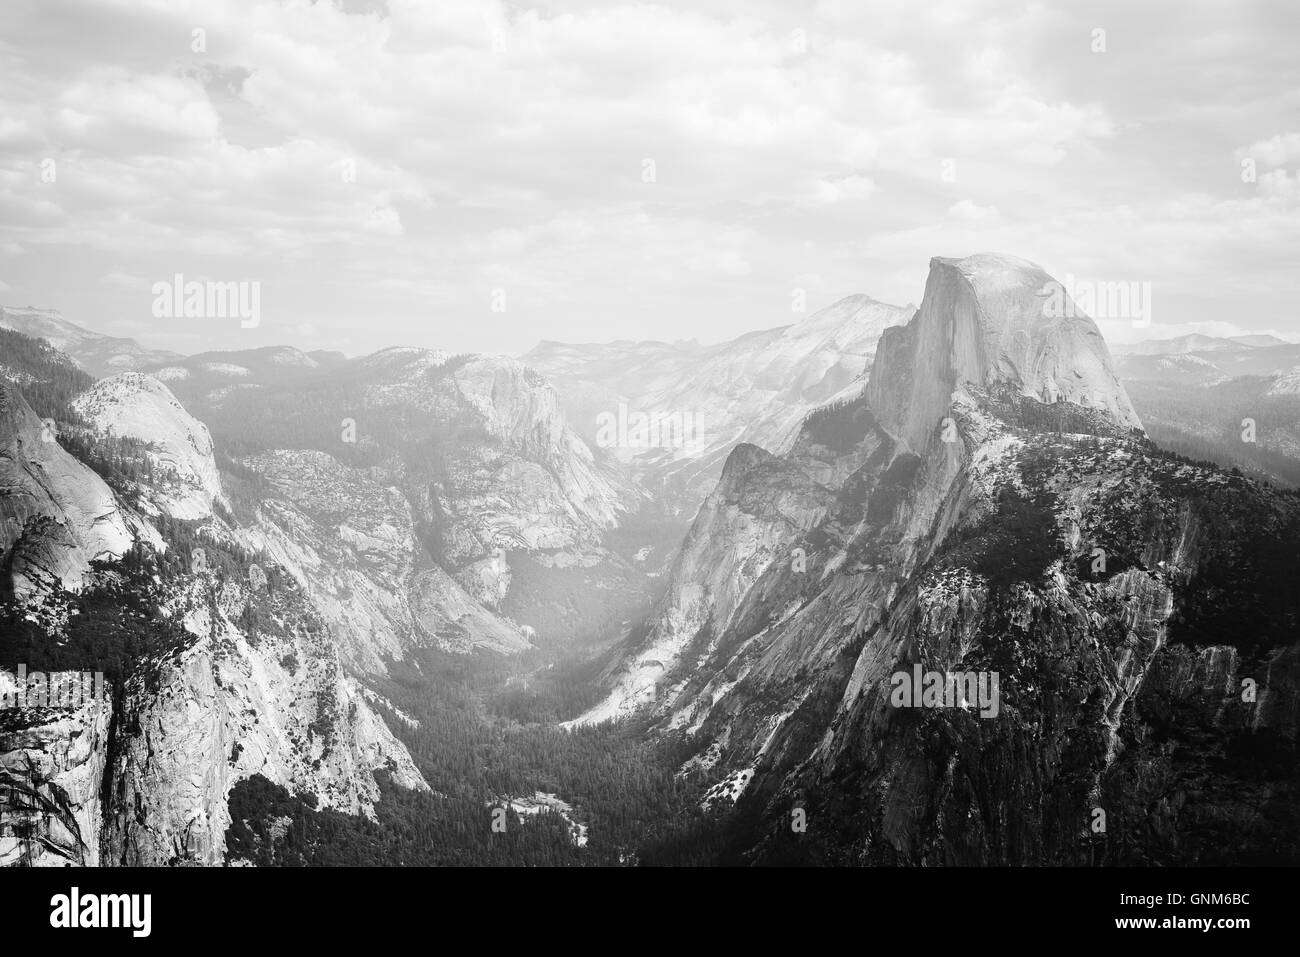 A view of Half Dome in California's Yosemite National Park Stock Photo